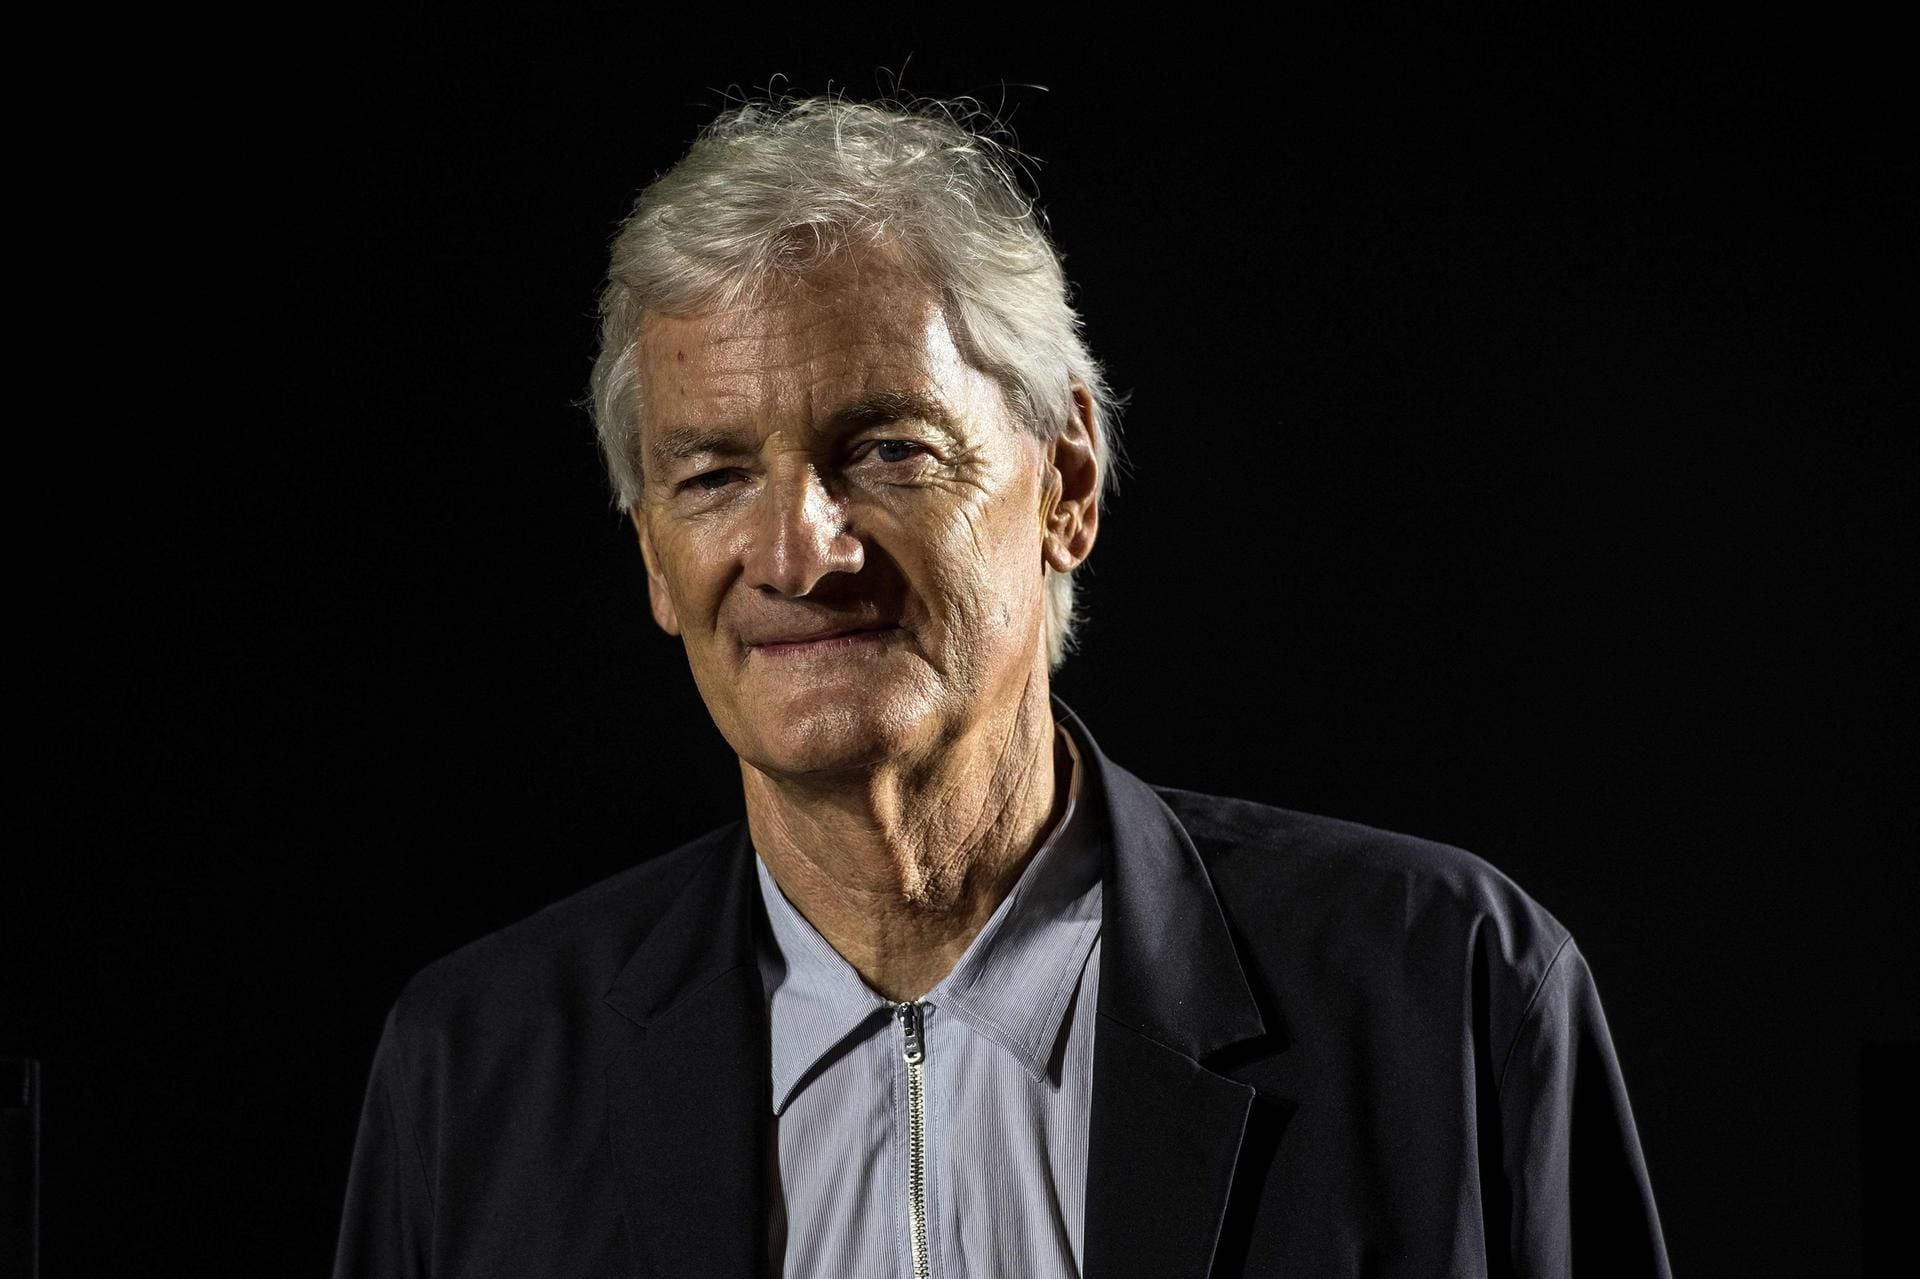 ornament Magtfulde Mellemøsten Sir James Dyson on why failure is the cornerstone of success